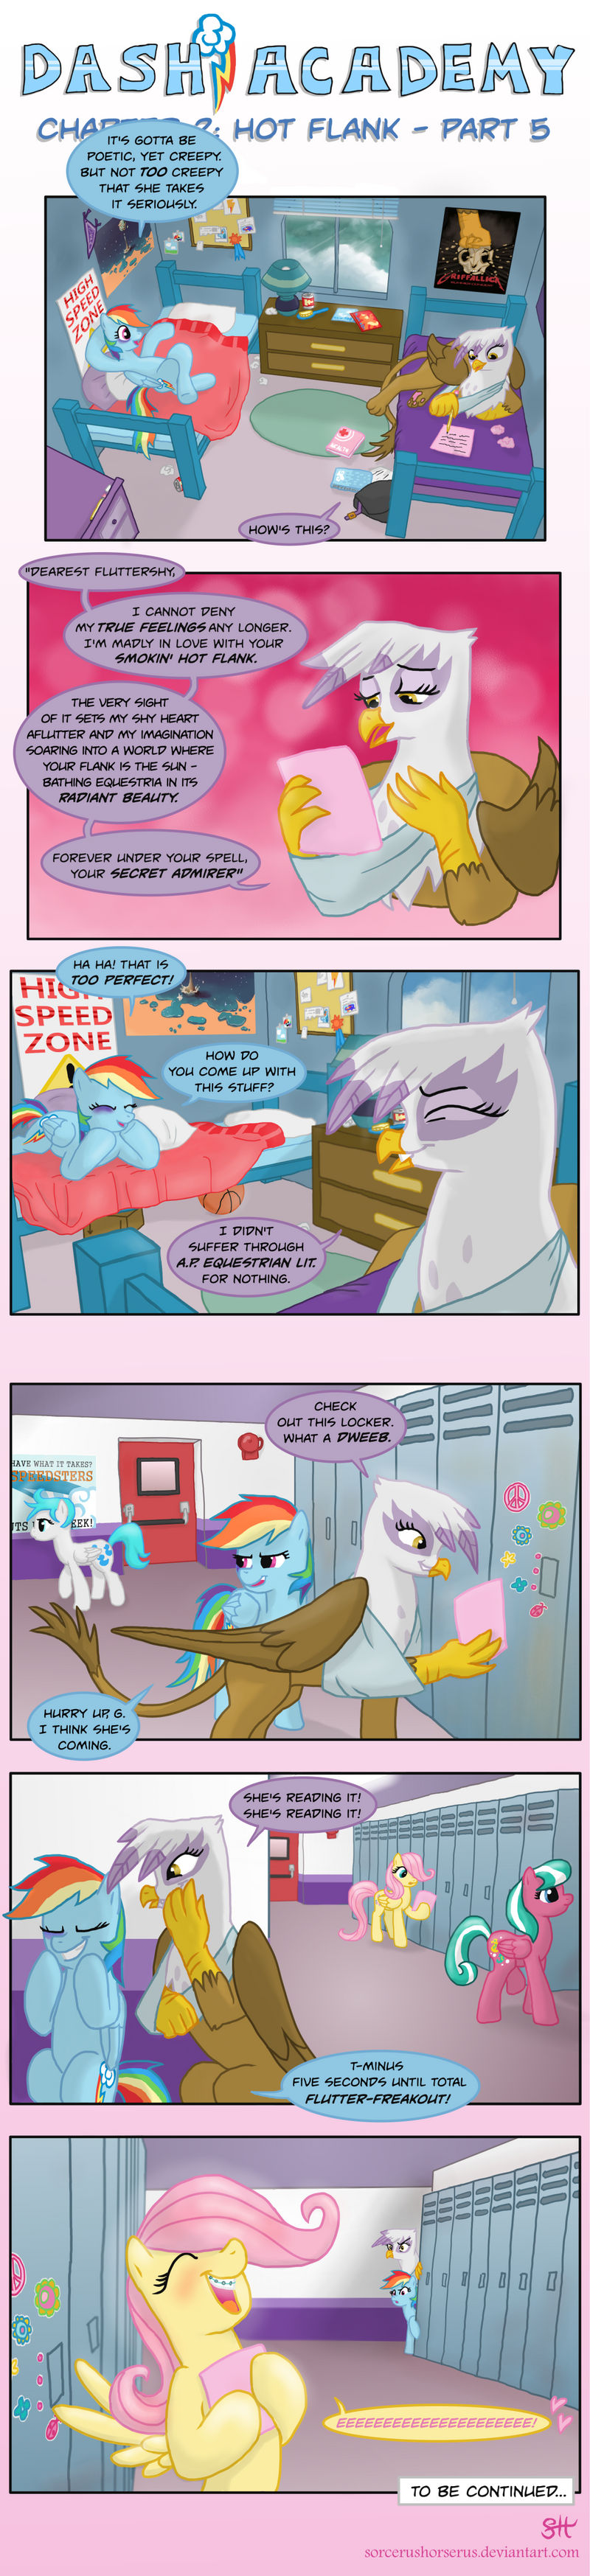 Dash Academy Chapter 2 - Hot Flank #5